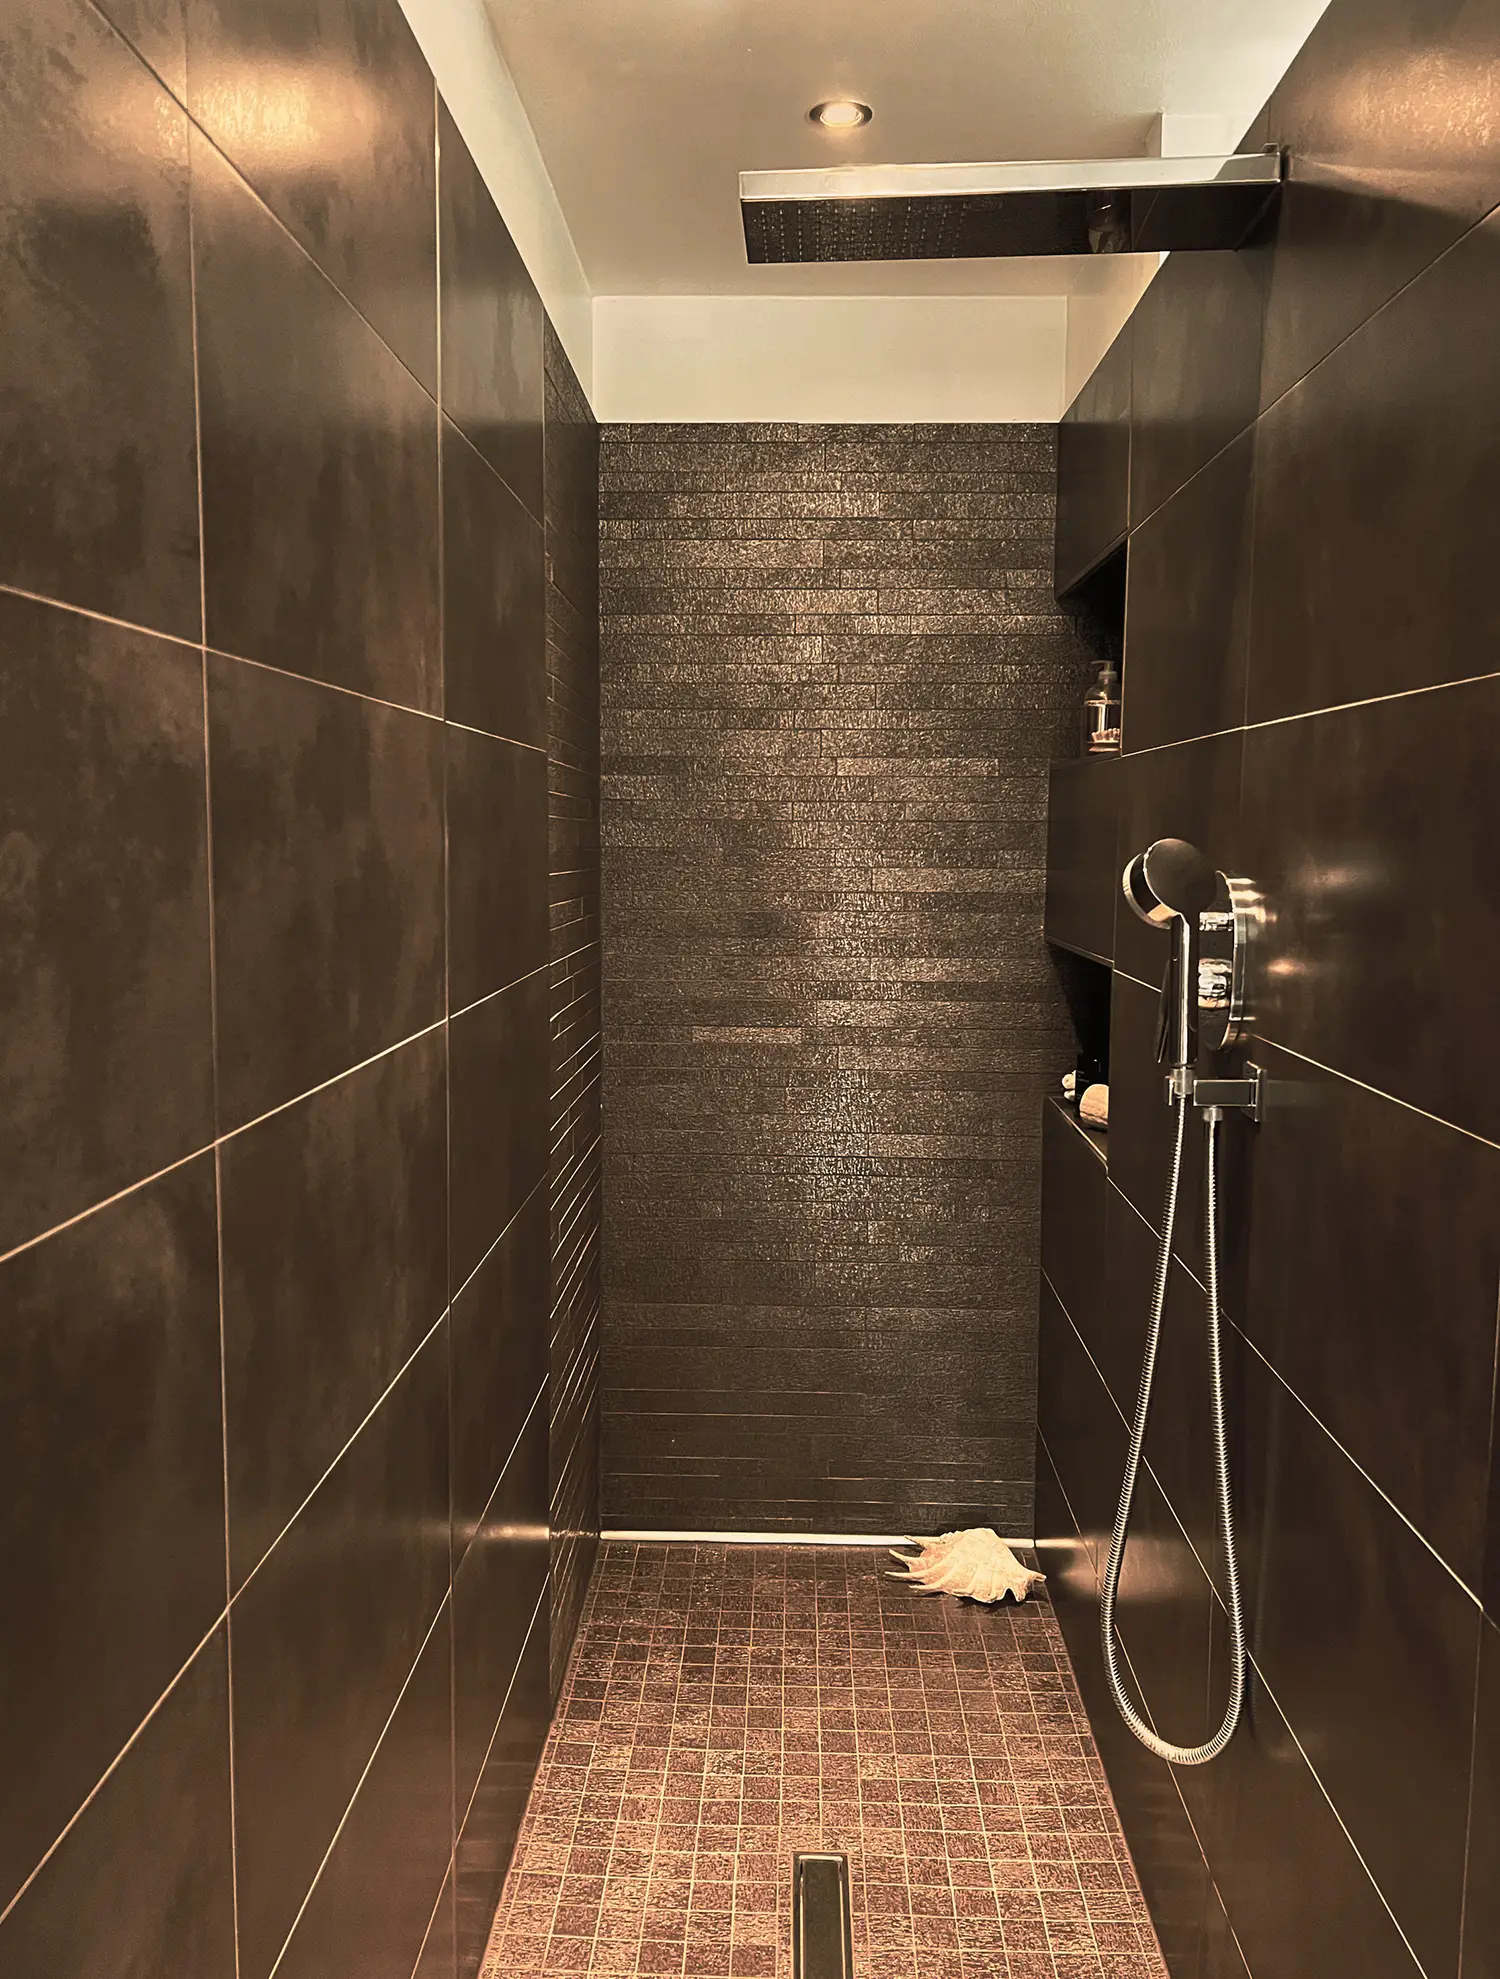 Photo of the shower with its brown ceramic floor and wall coverings in 3 different layouts; renovation by studio Elles Interior Design.